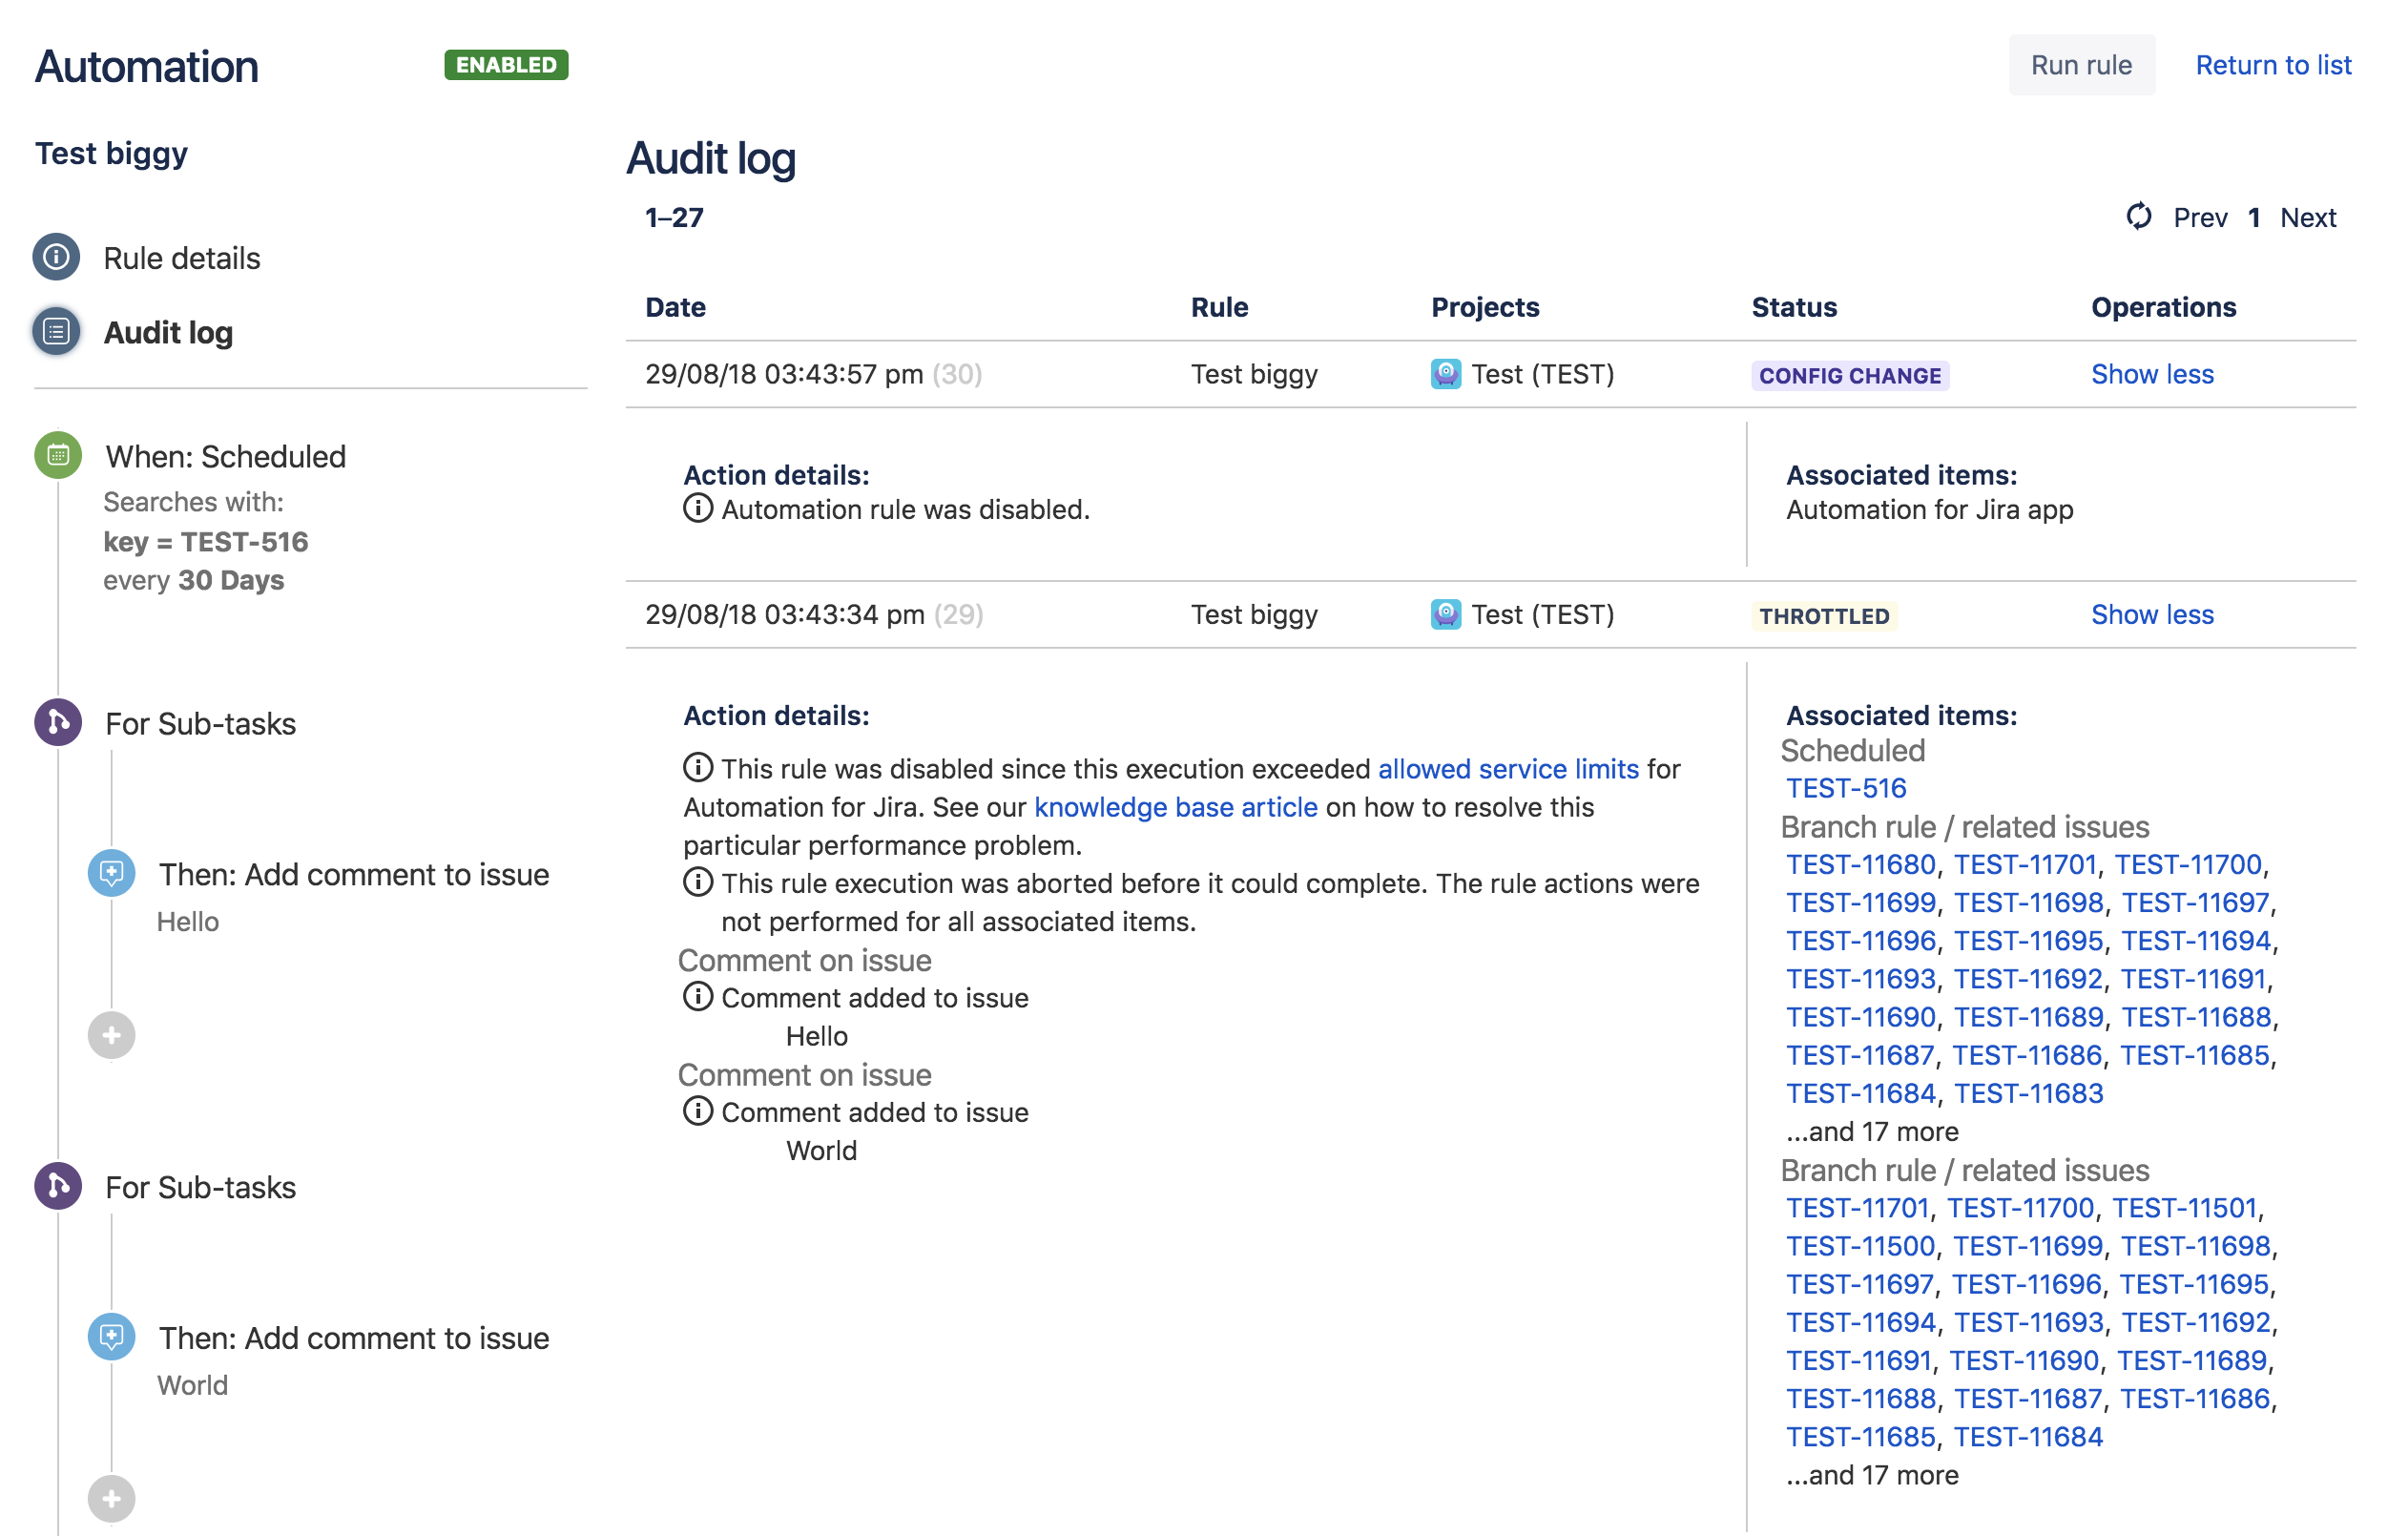 Audit Log screen in Jira automation. It shows a rule has breached limits, and provides detailed information about the breach.